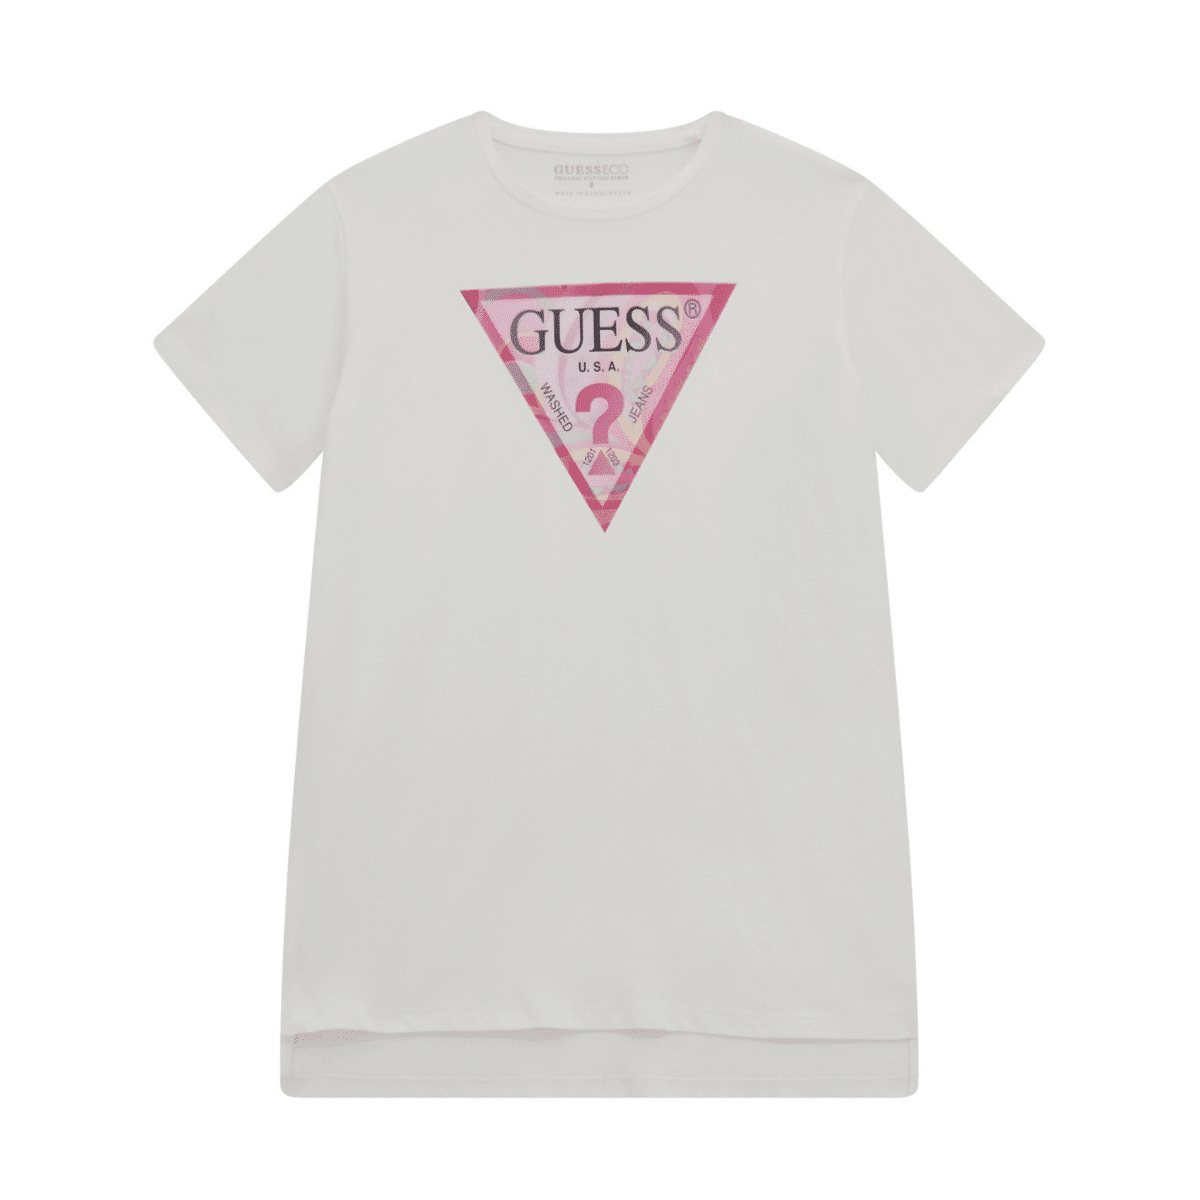 guess girls white tshirt with triangle question mark logo